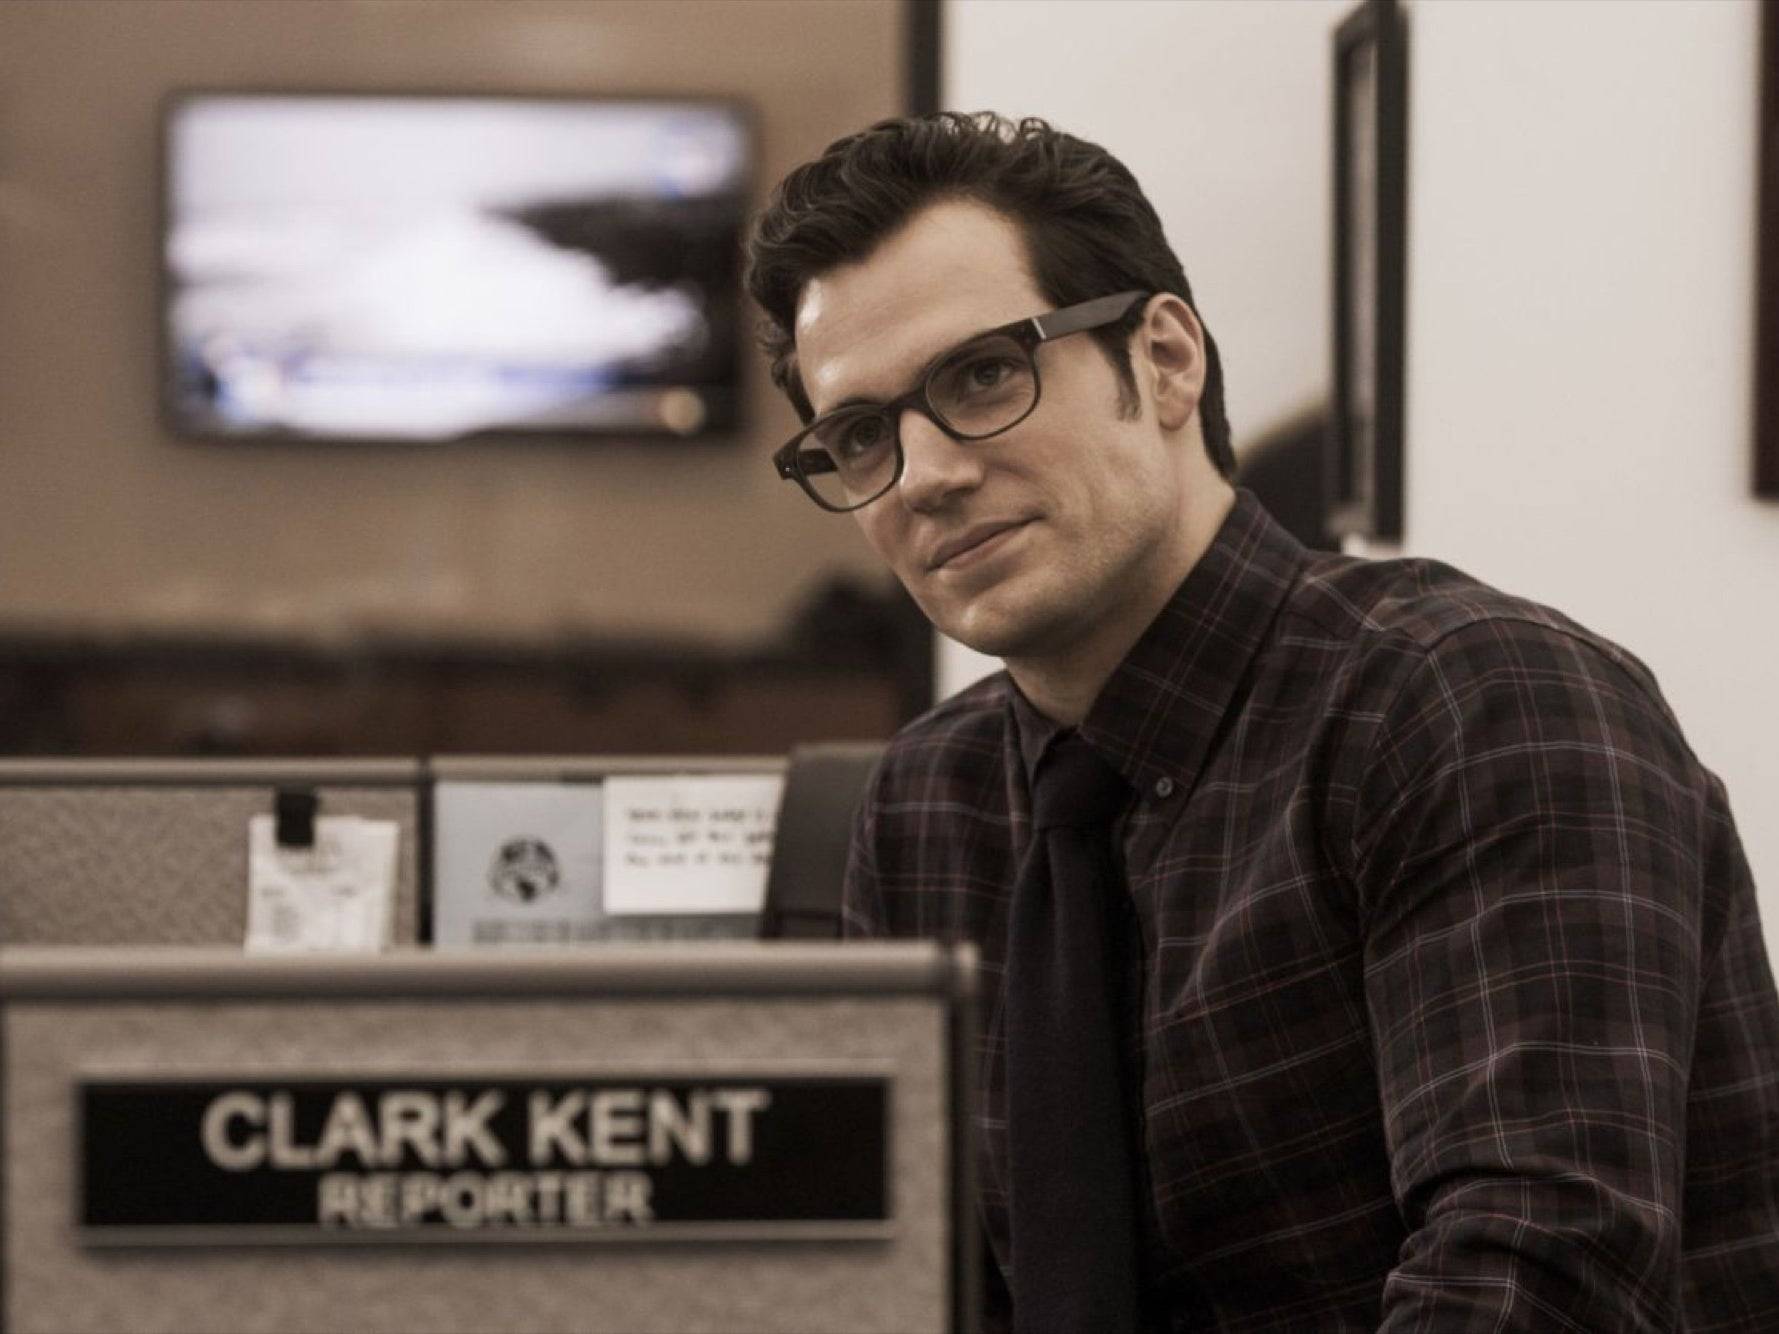 Actor Henry Cavill posing as clark kent the reporter wearing a patterned shirt, tie and standing in his office as a reporter